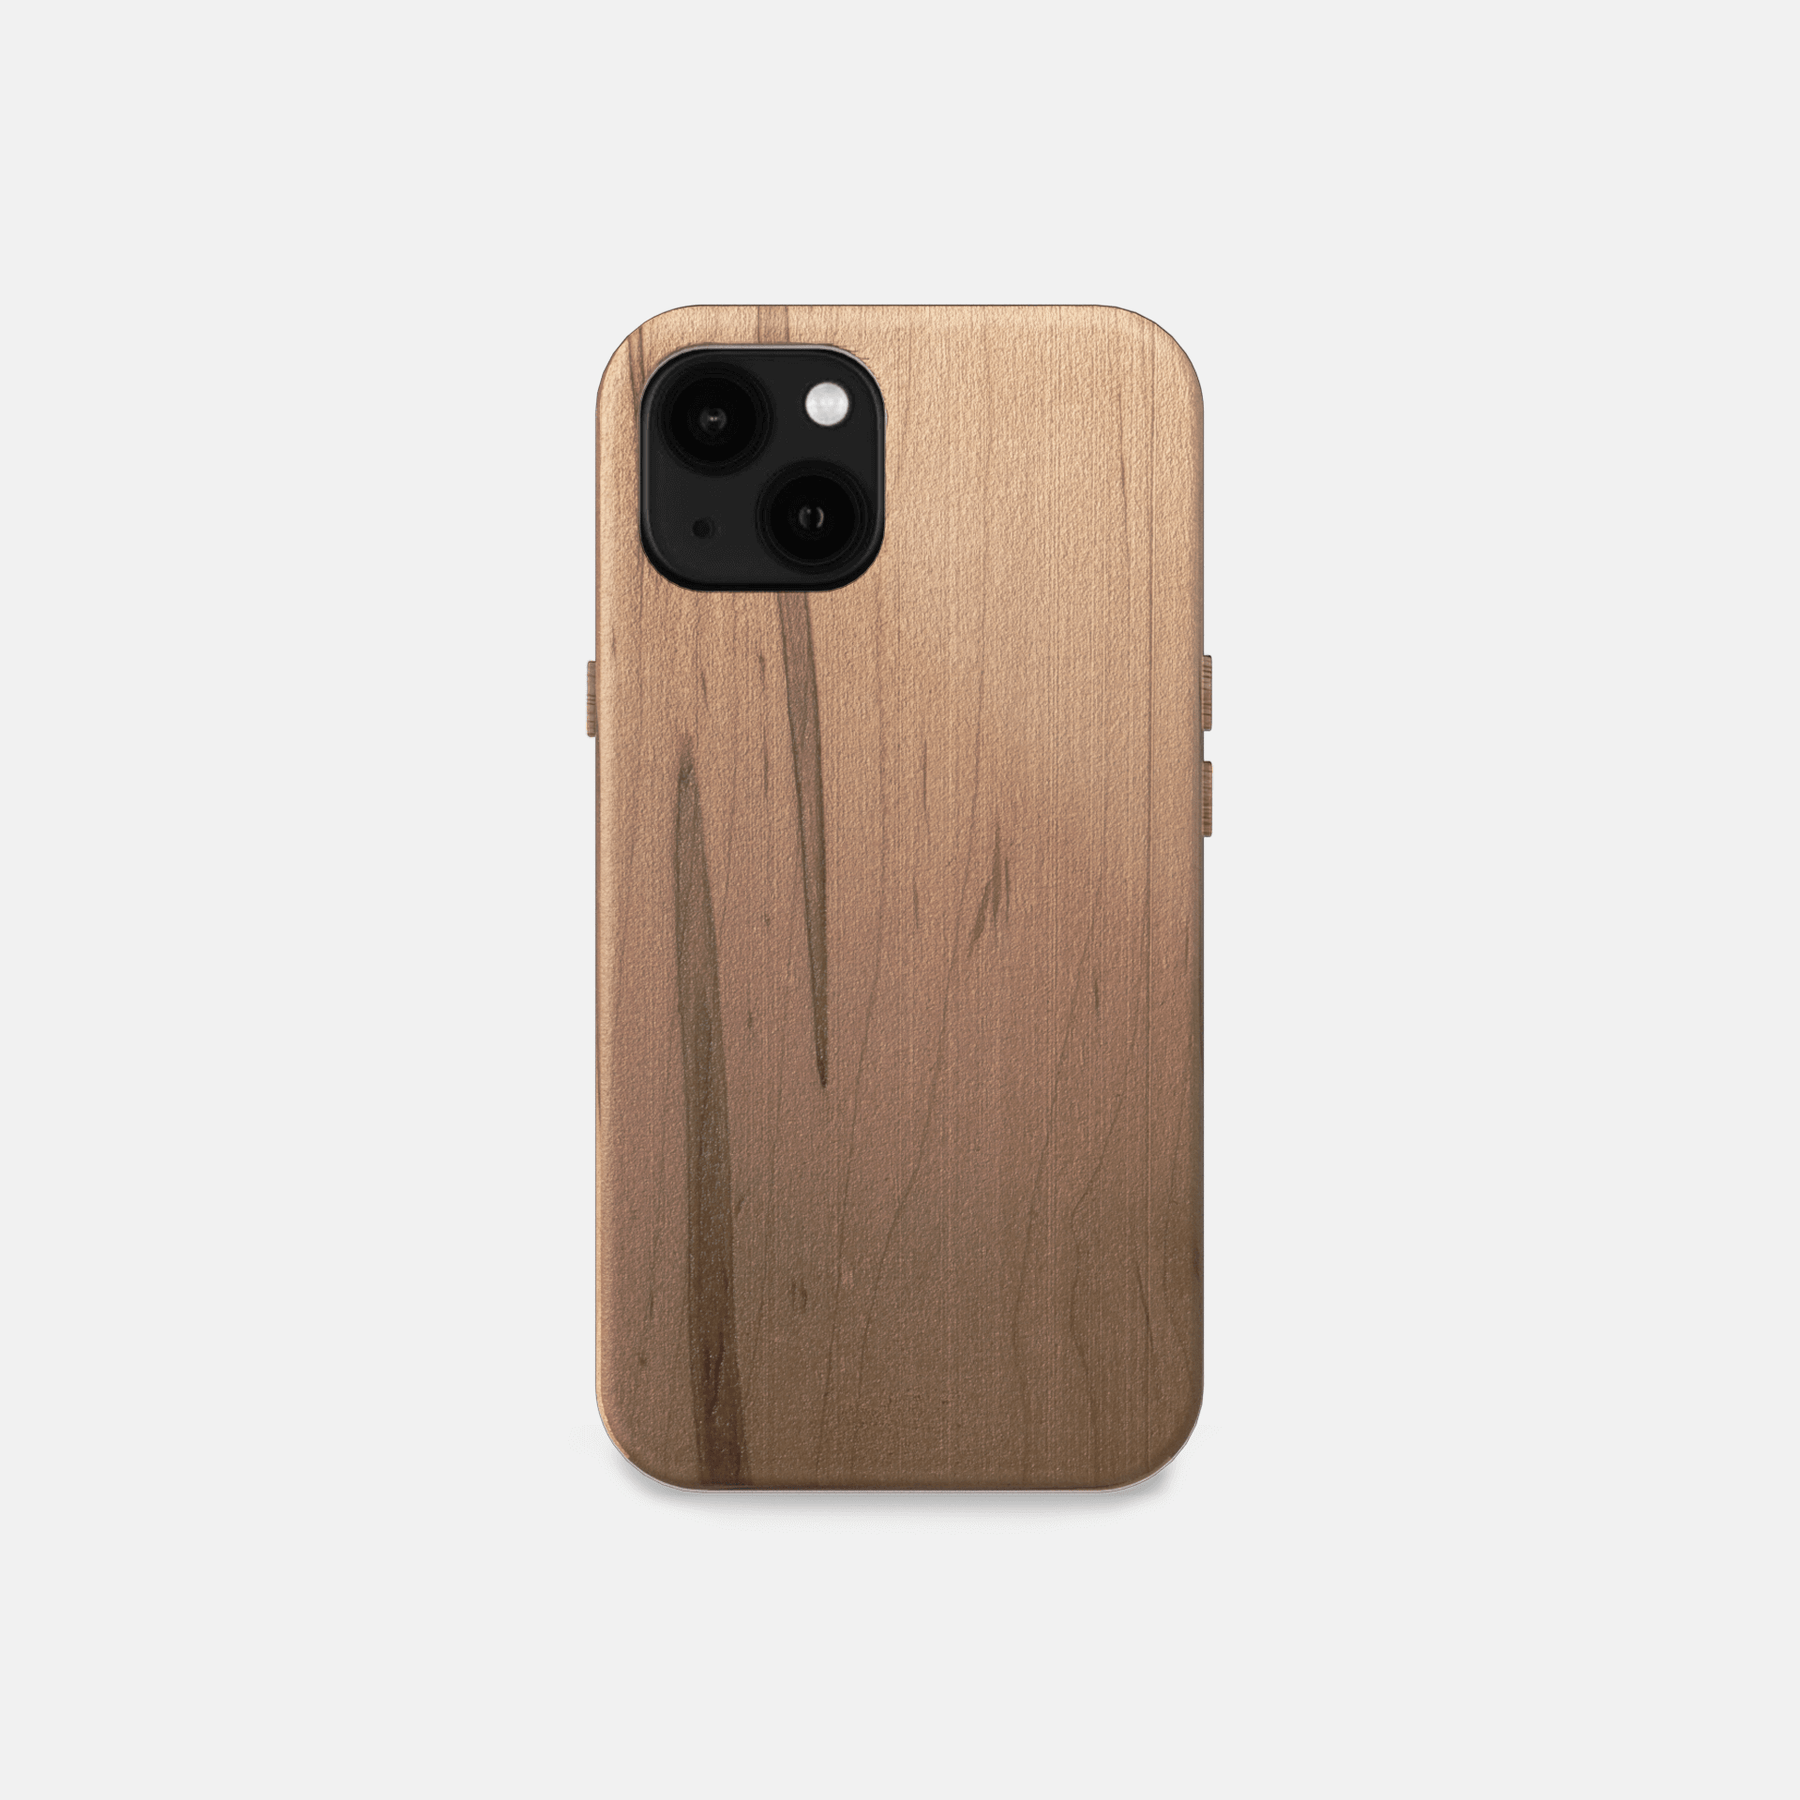 iPhone Cases: Your Guide to Size & Compatibility (6th - 14th Gen) - Carved